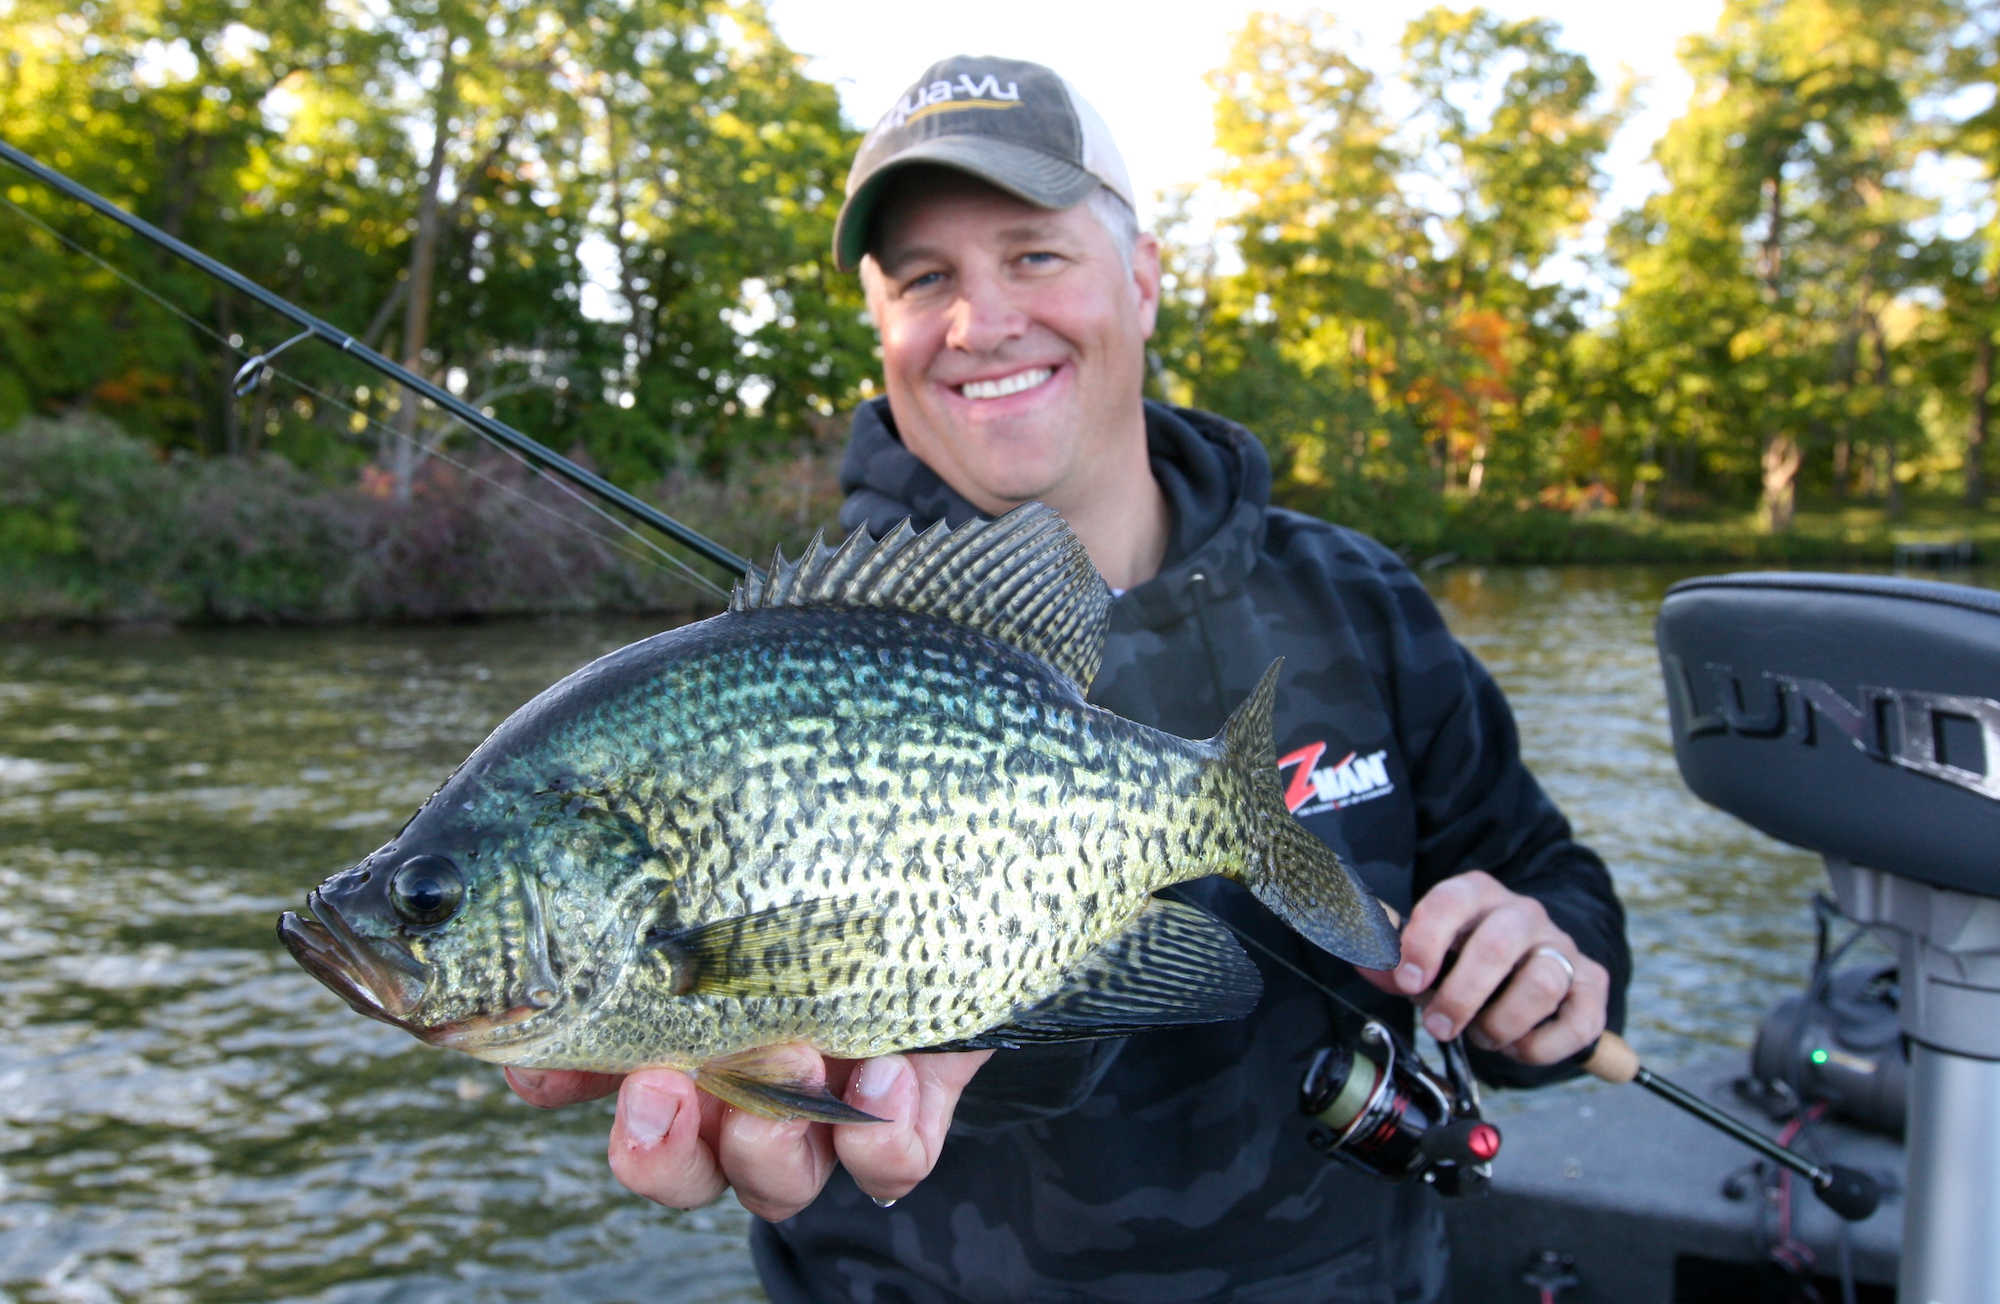 Best Crappie Fishing Gear: Rods, Reels, & Lures that never fail